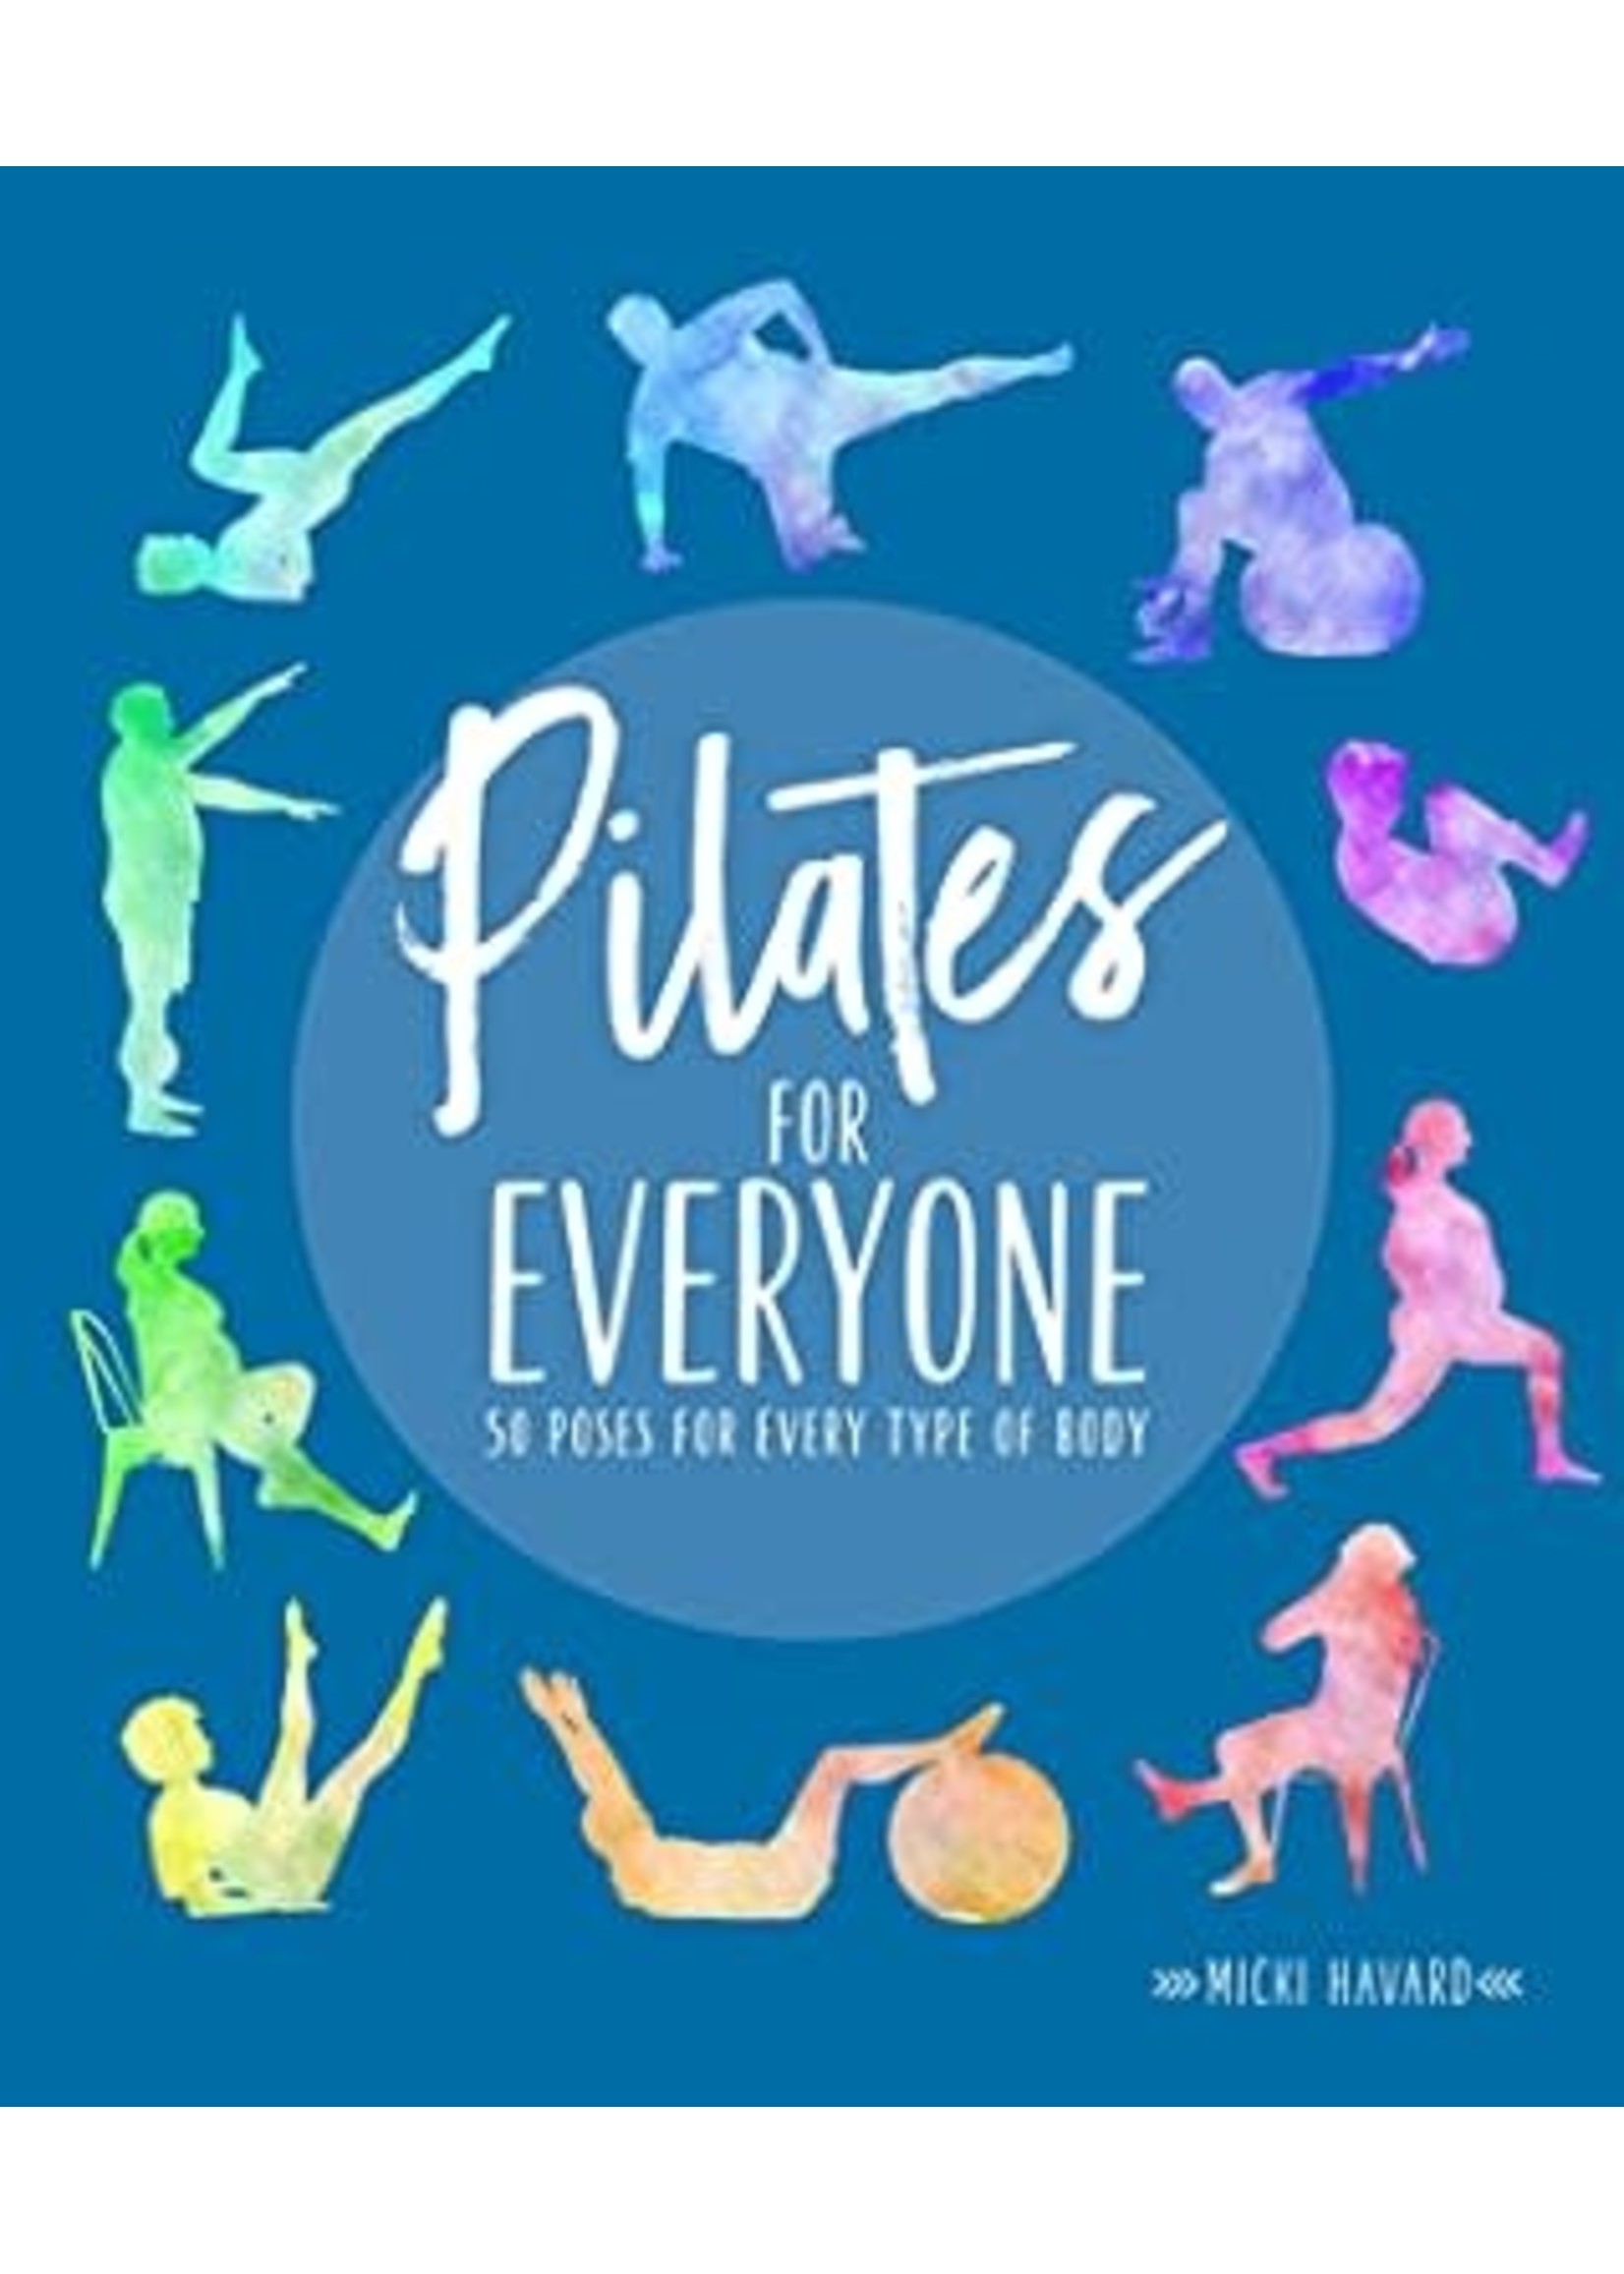 Pilates for Everyone: 50 exercises for every type of body by Micki Havard